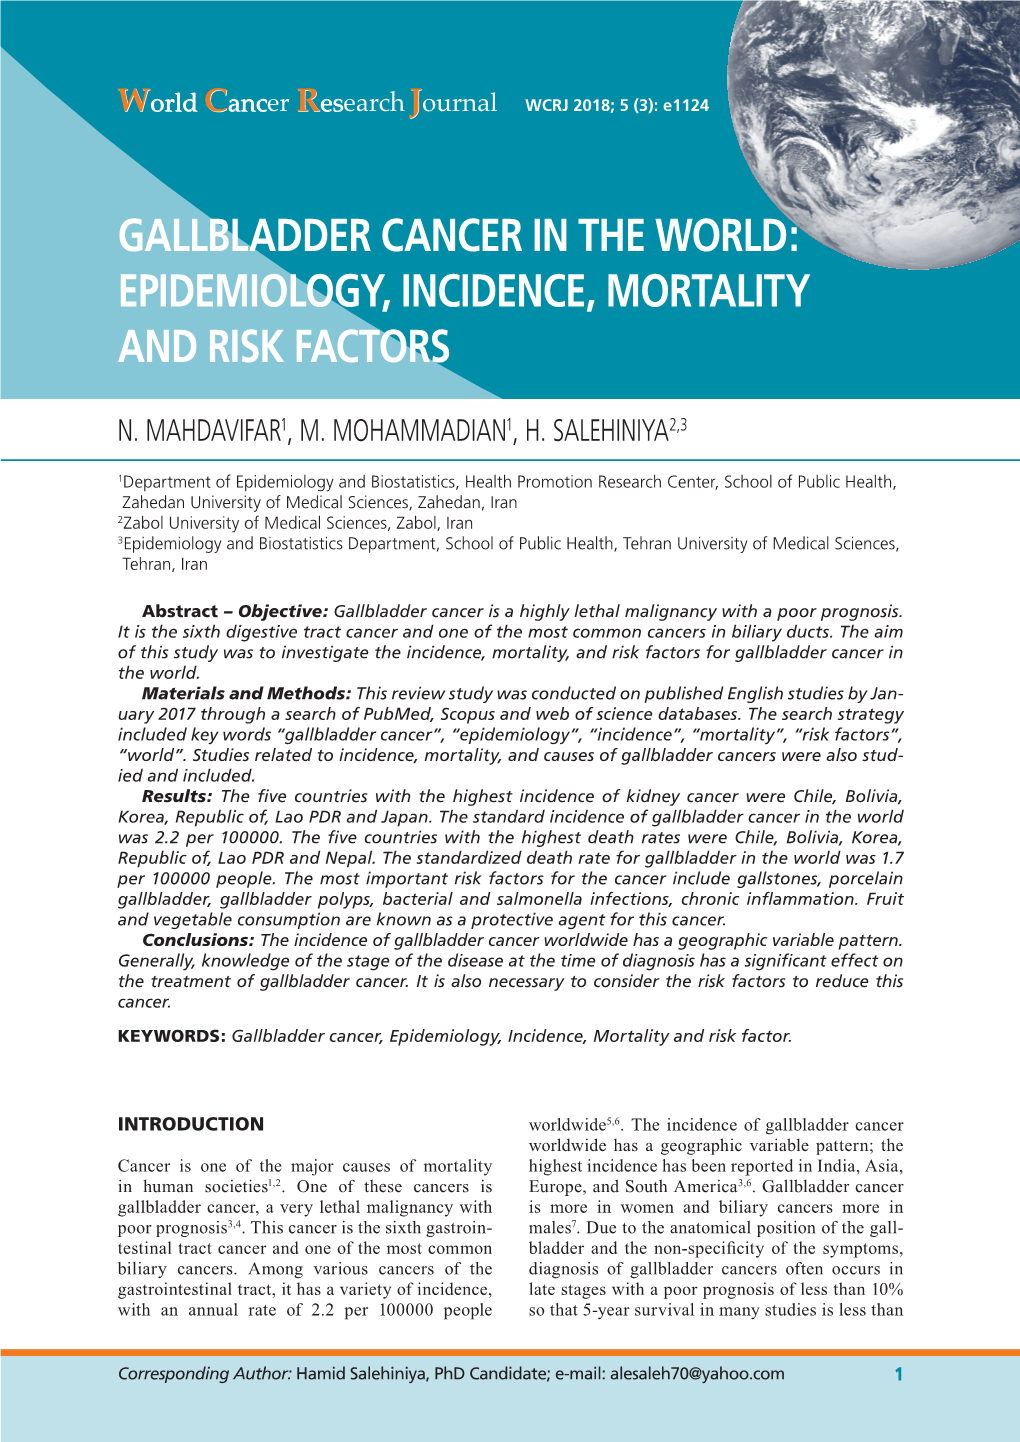 Gallbladder Cancer in the World: Epidemiology, Incidence, Mortality and Risk Factors